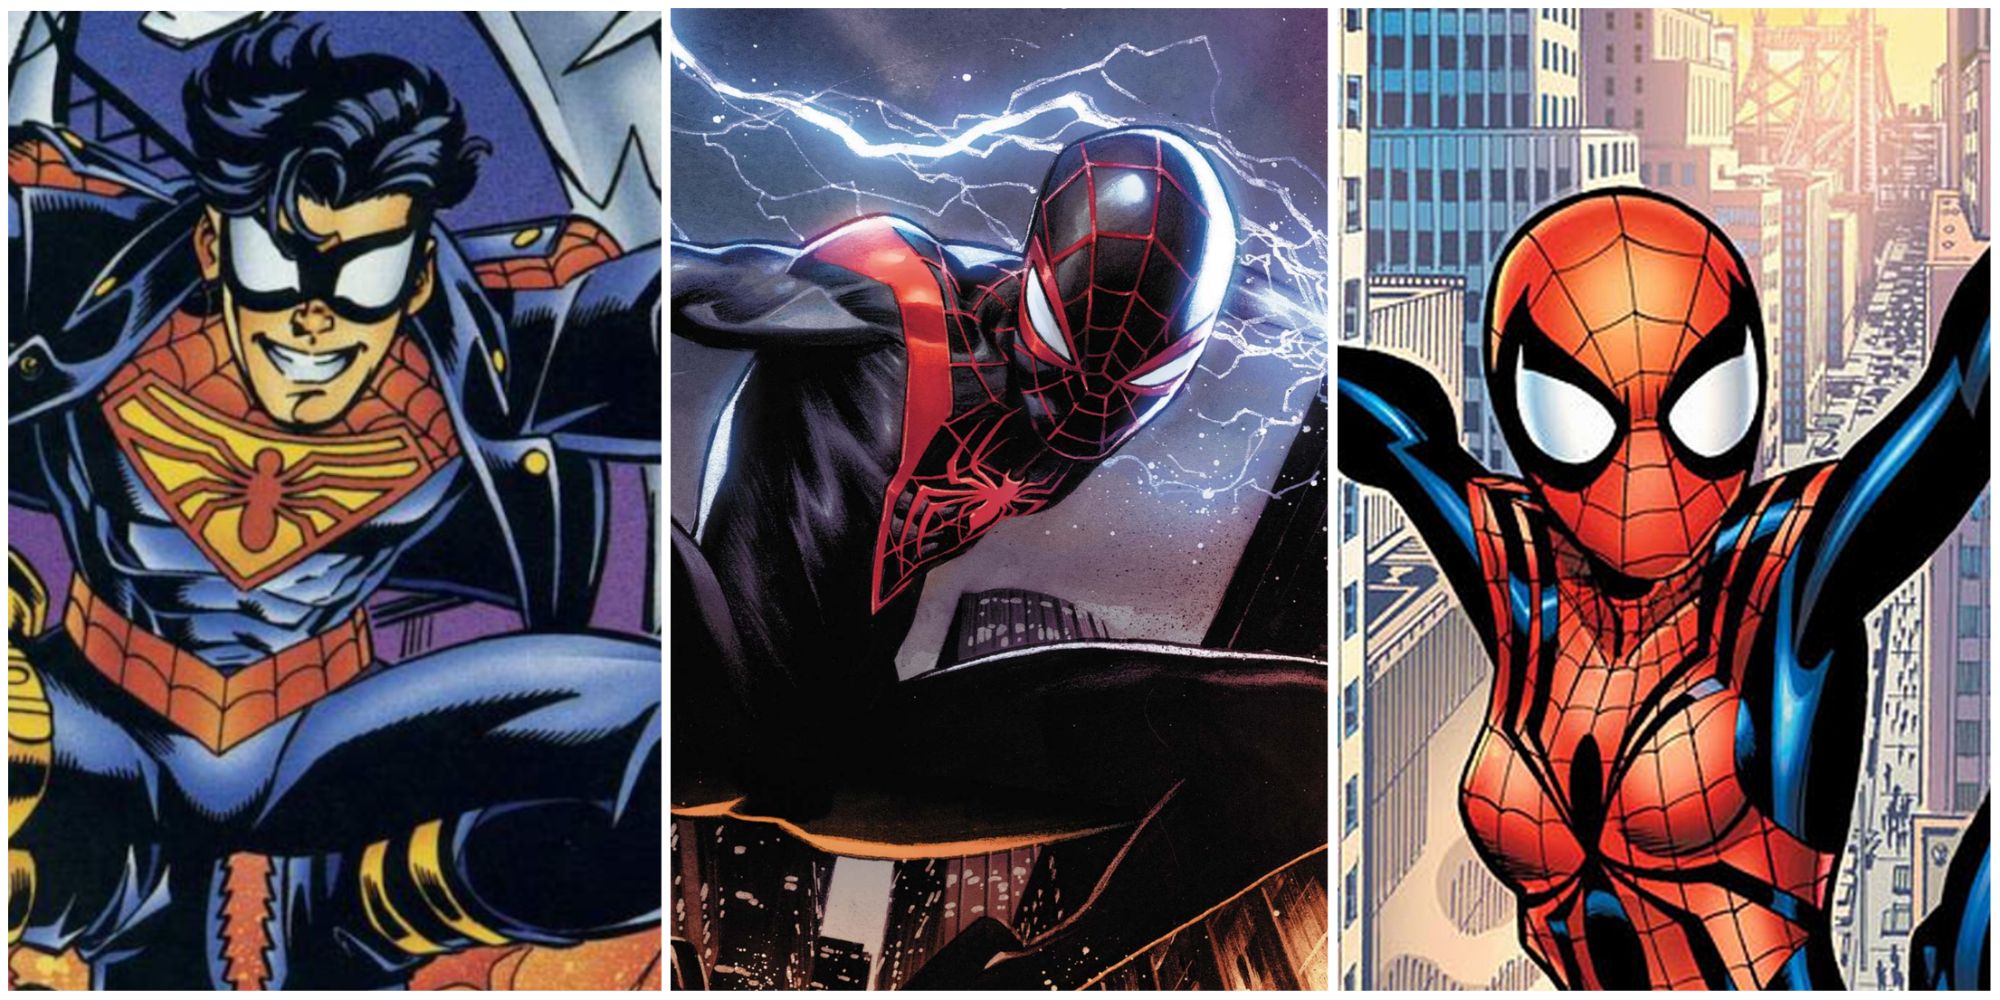 A split image of Pete Ross Spider-Boy, pf Miles Morales Spider-Man, and of Mayday Parker Spider-Girl from Marvel Comics